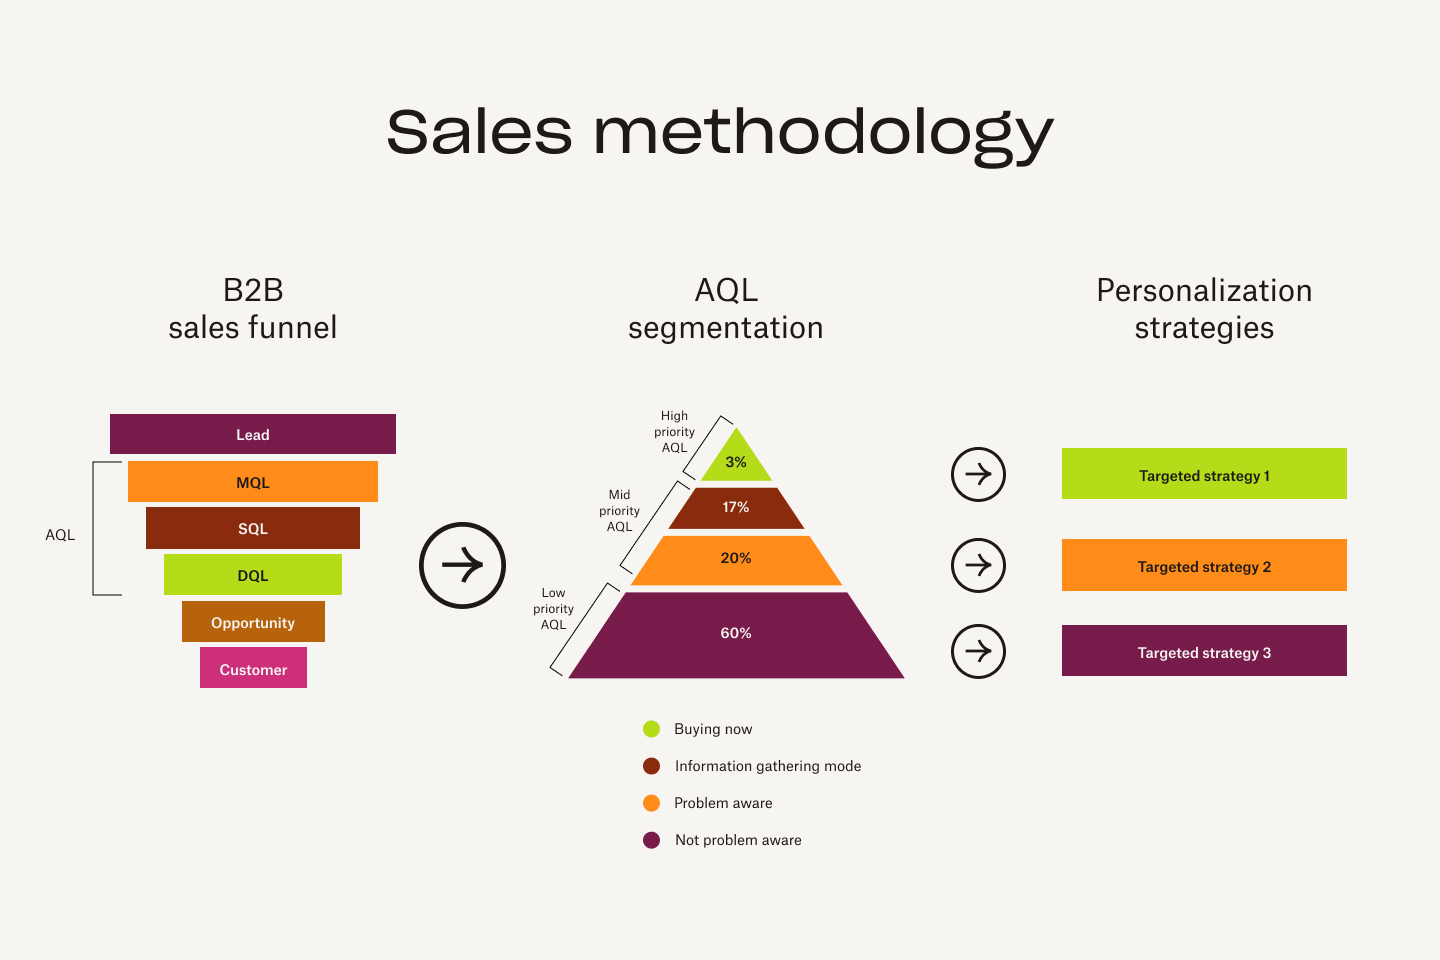 A sales methodology outline which shows how leads pass from B2B sales funnel to AQL segmentation and then to their personalization strategies